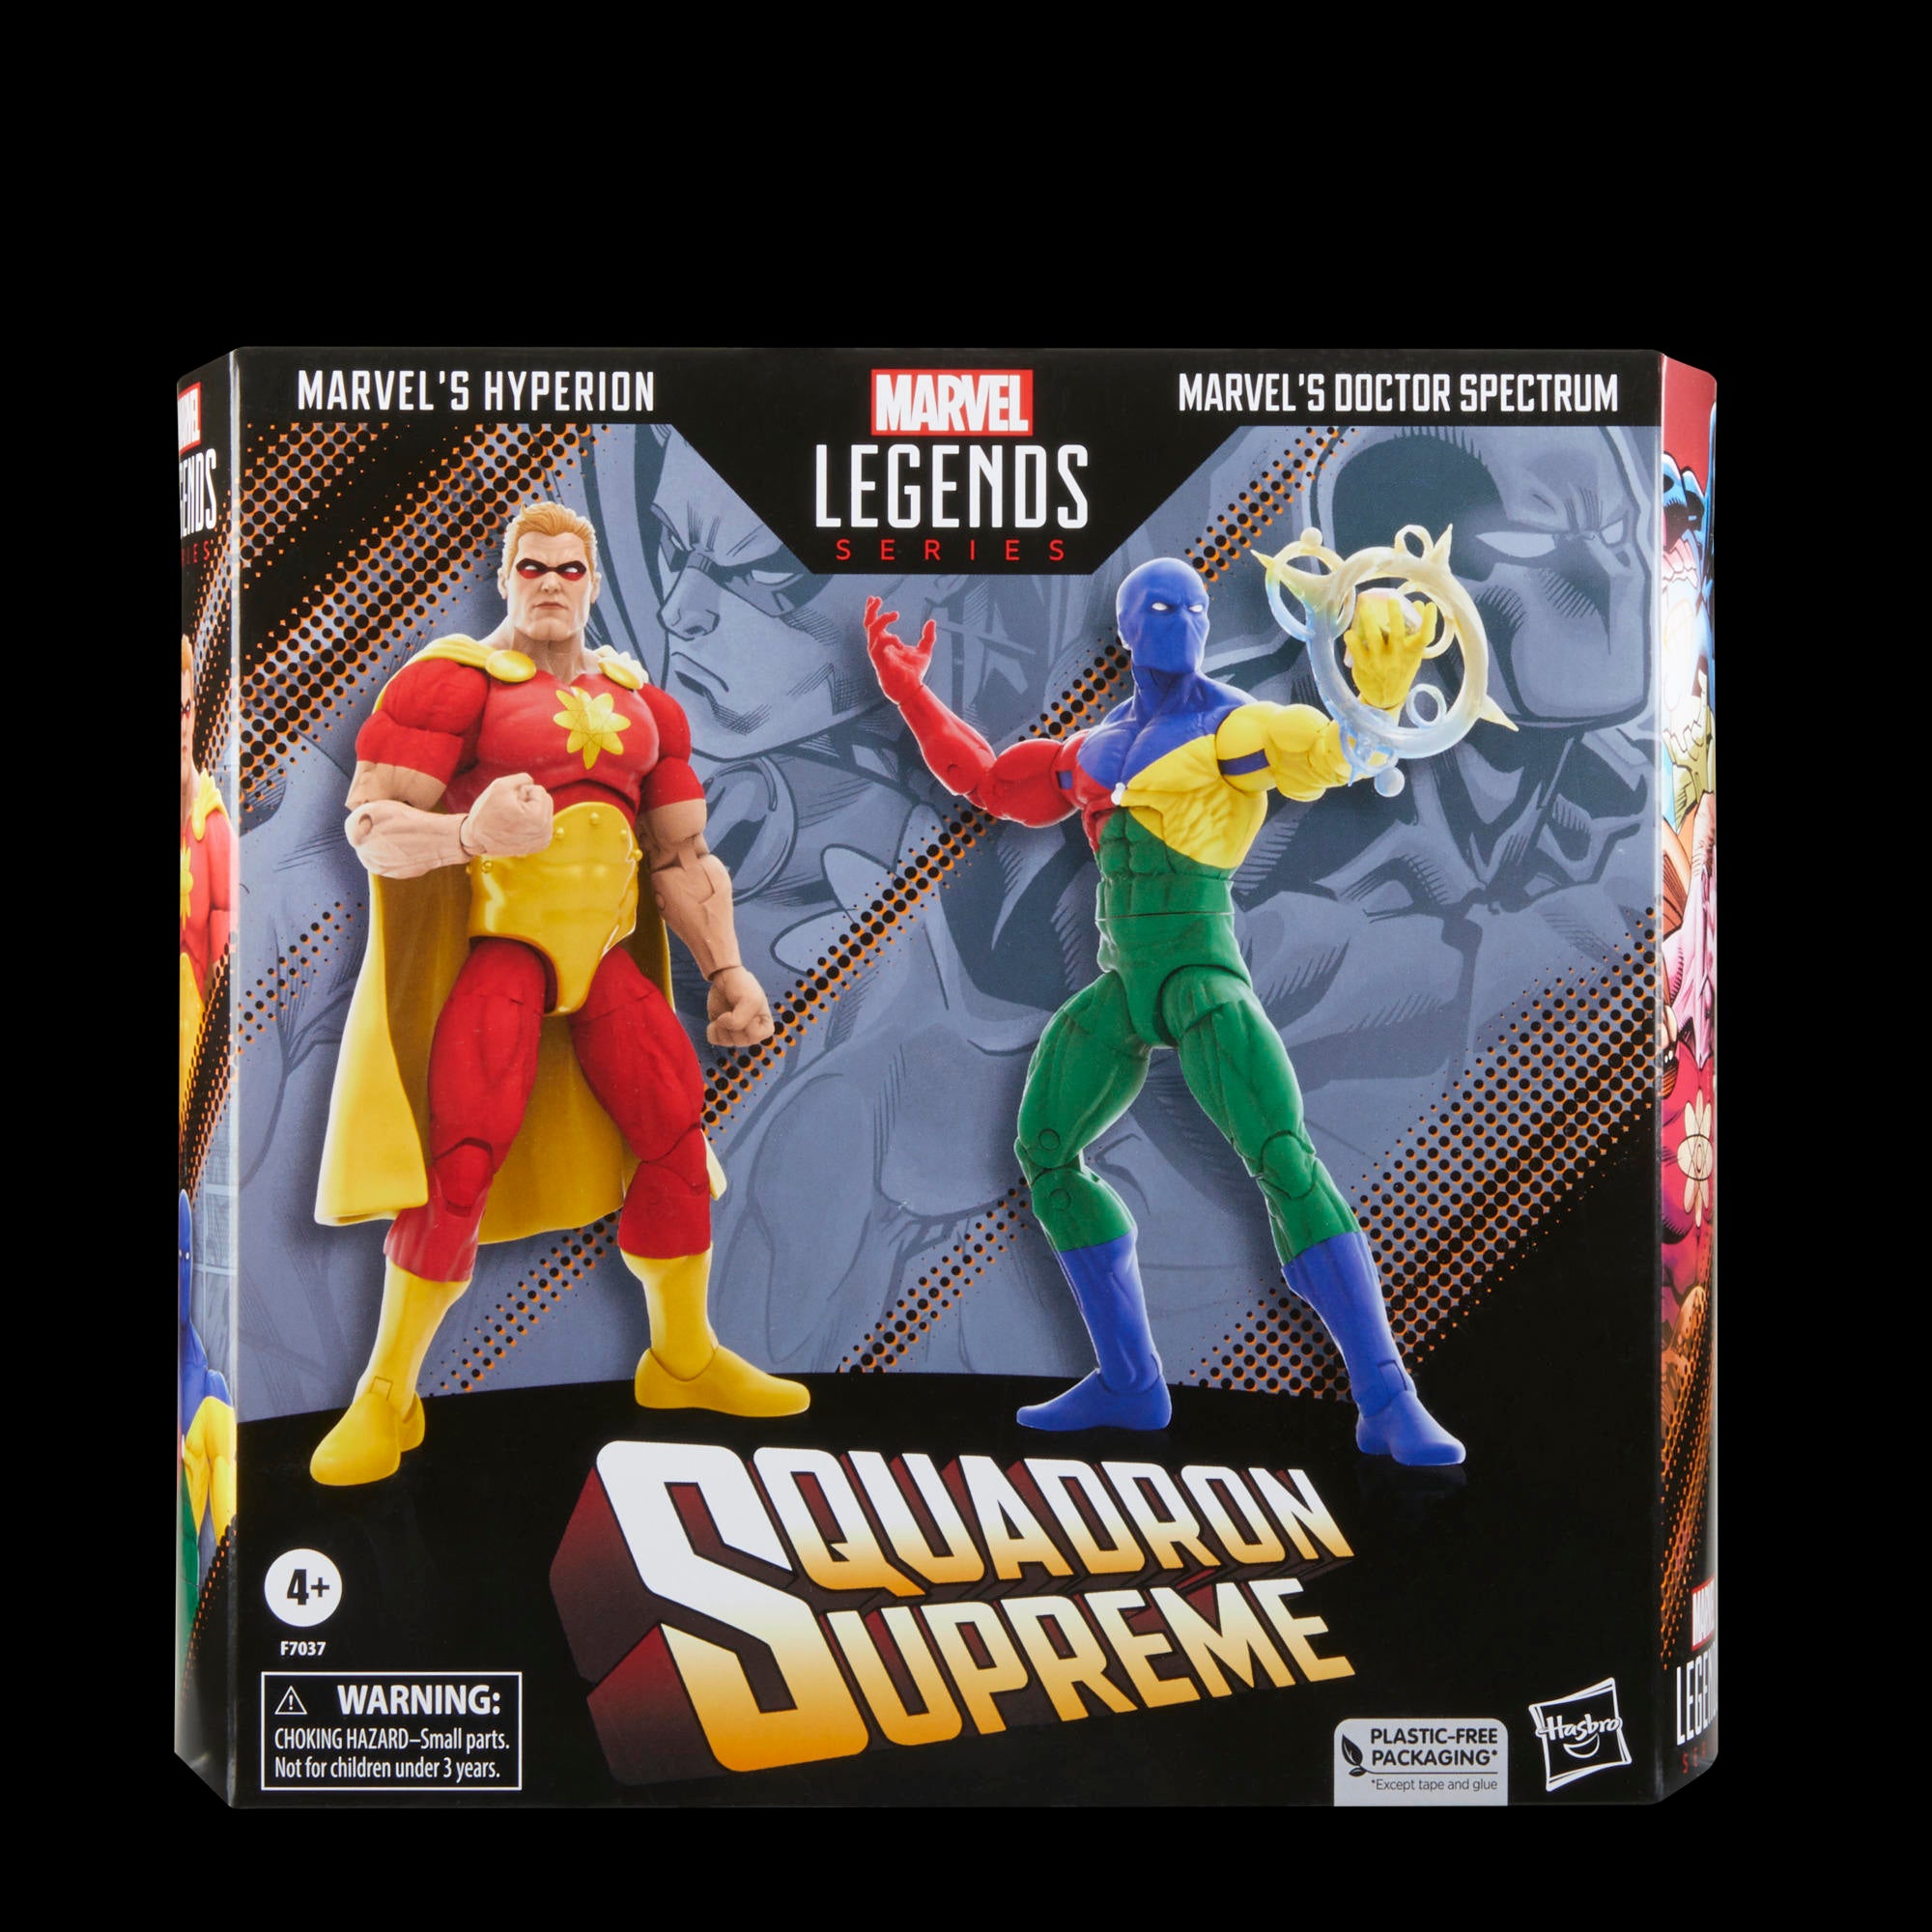 Marvel Legends Hyperion and Doctor Spectrum Squadron Supreme 2-Pack Is On The Way From Hasbro